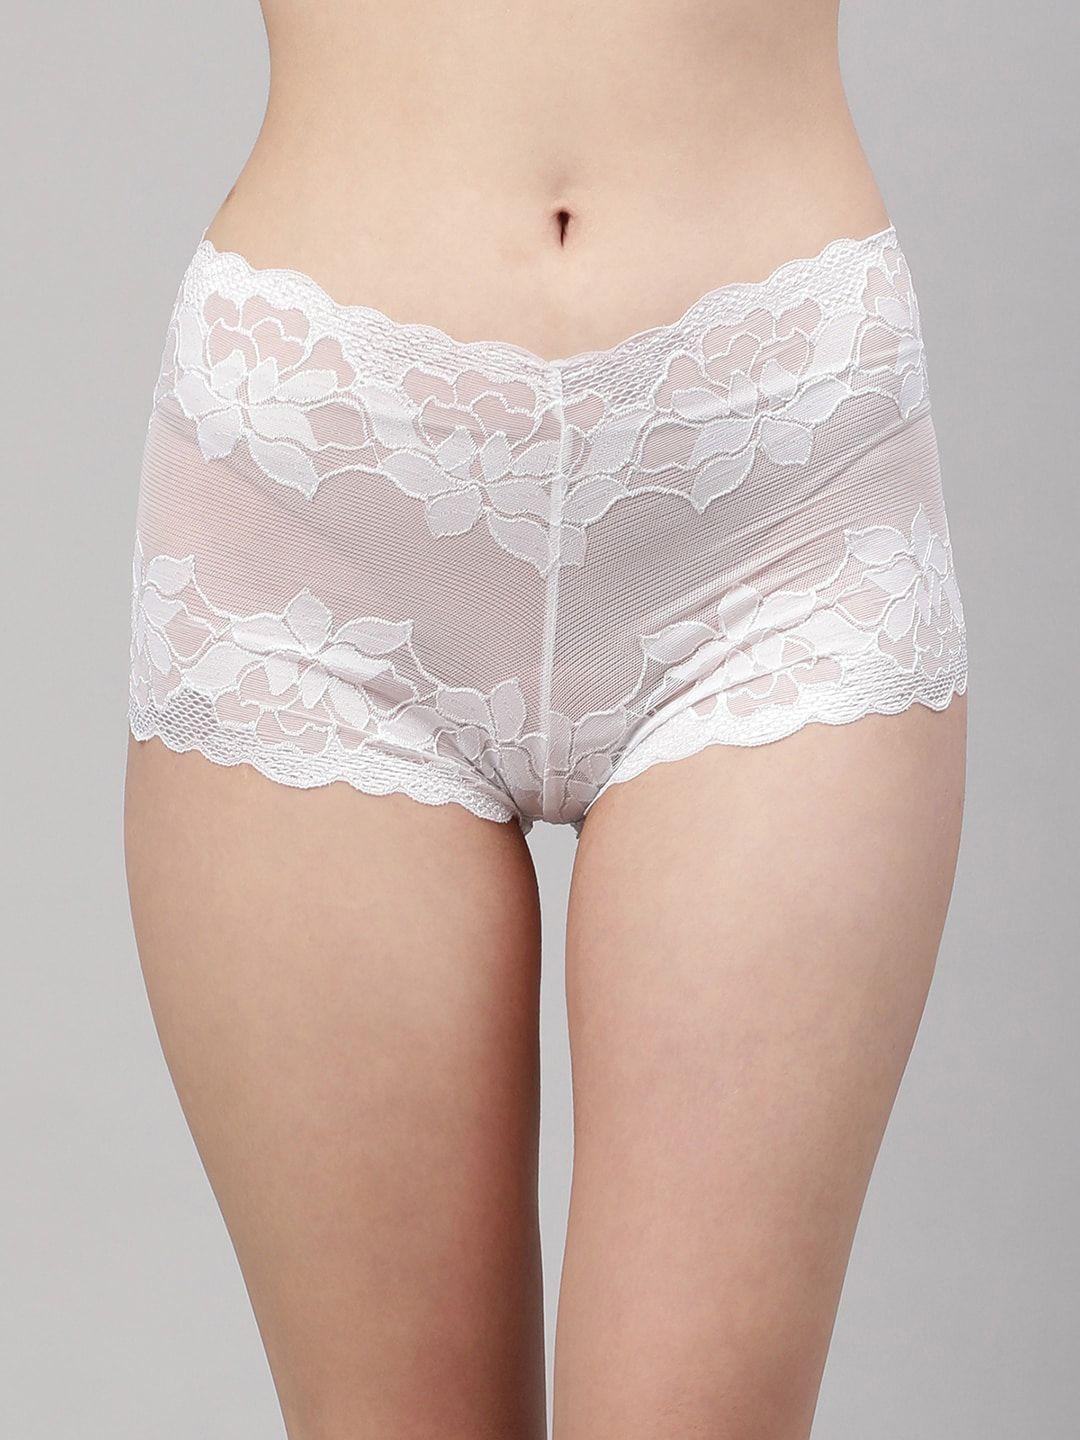 cukoo-women-nylon-lace-hipster